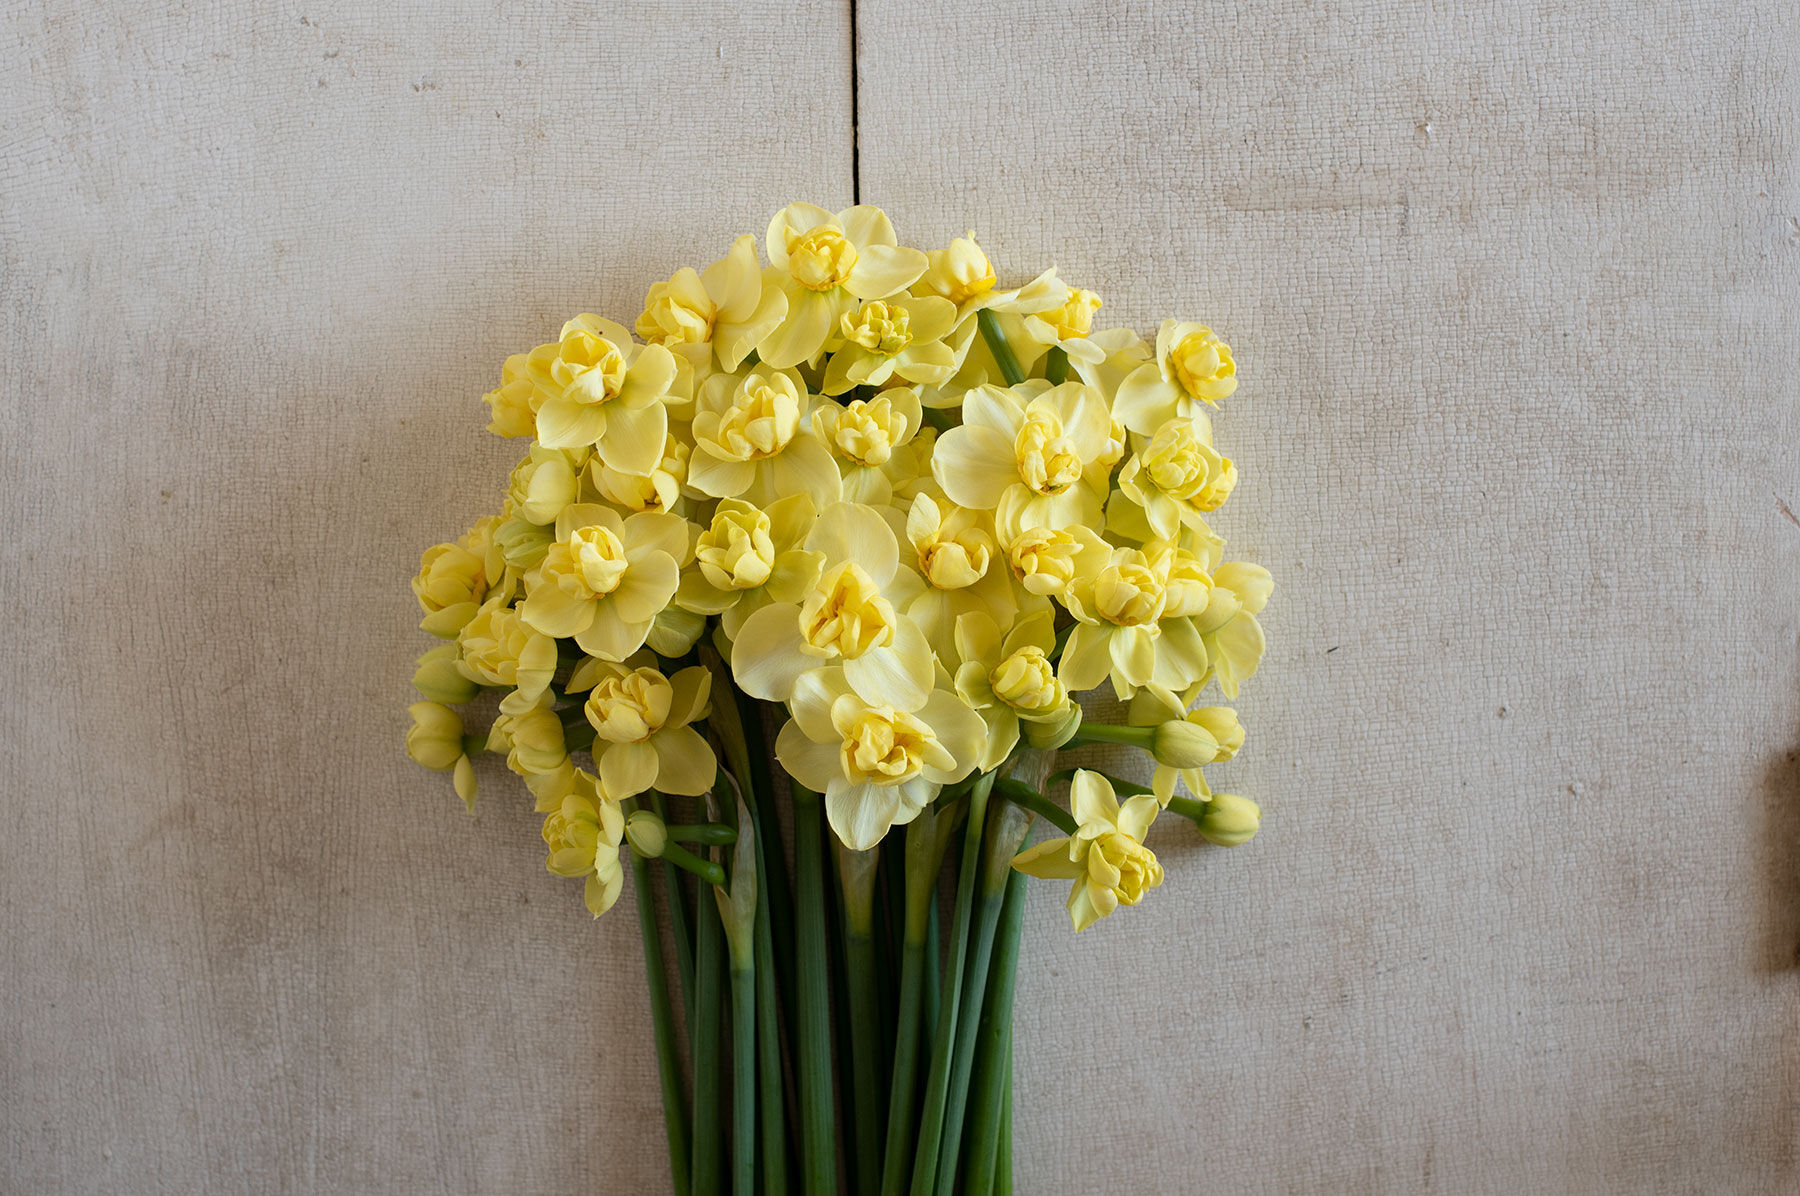 Narcissus Bulbs - Daffodil Varieties | Johnny's Selected Seeds